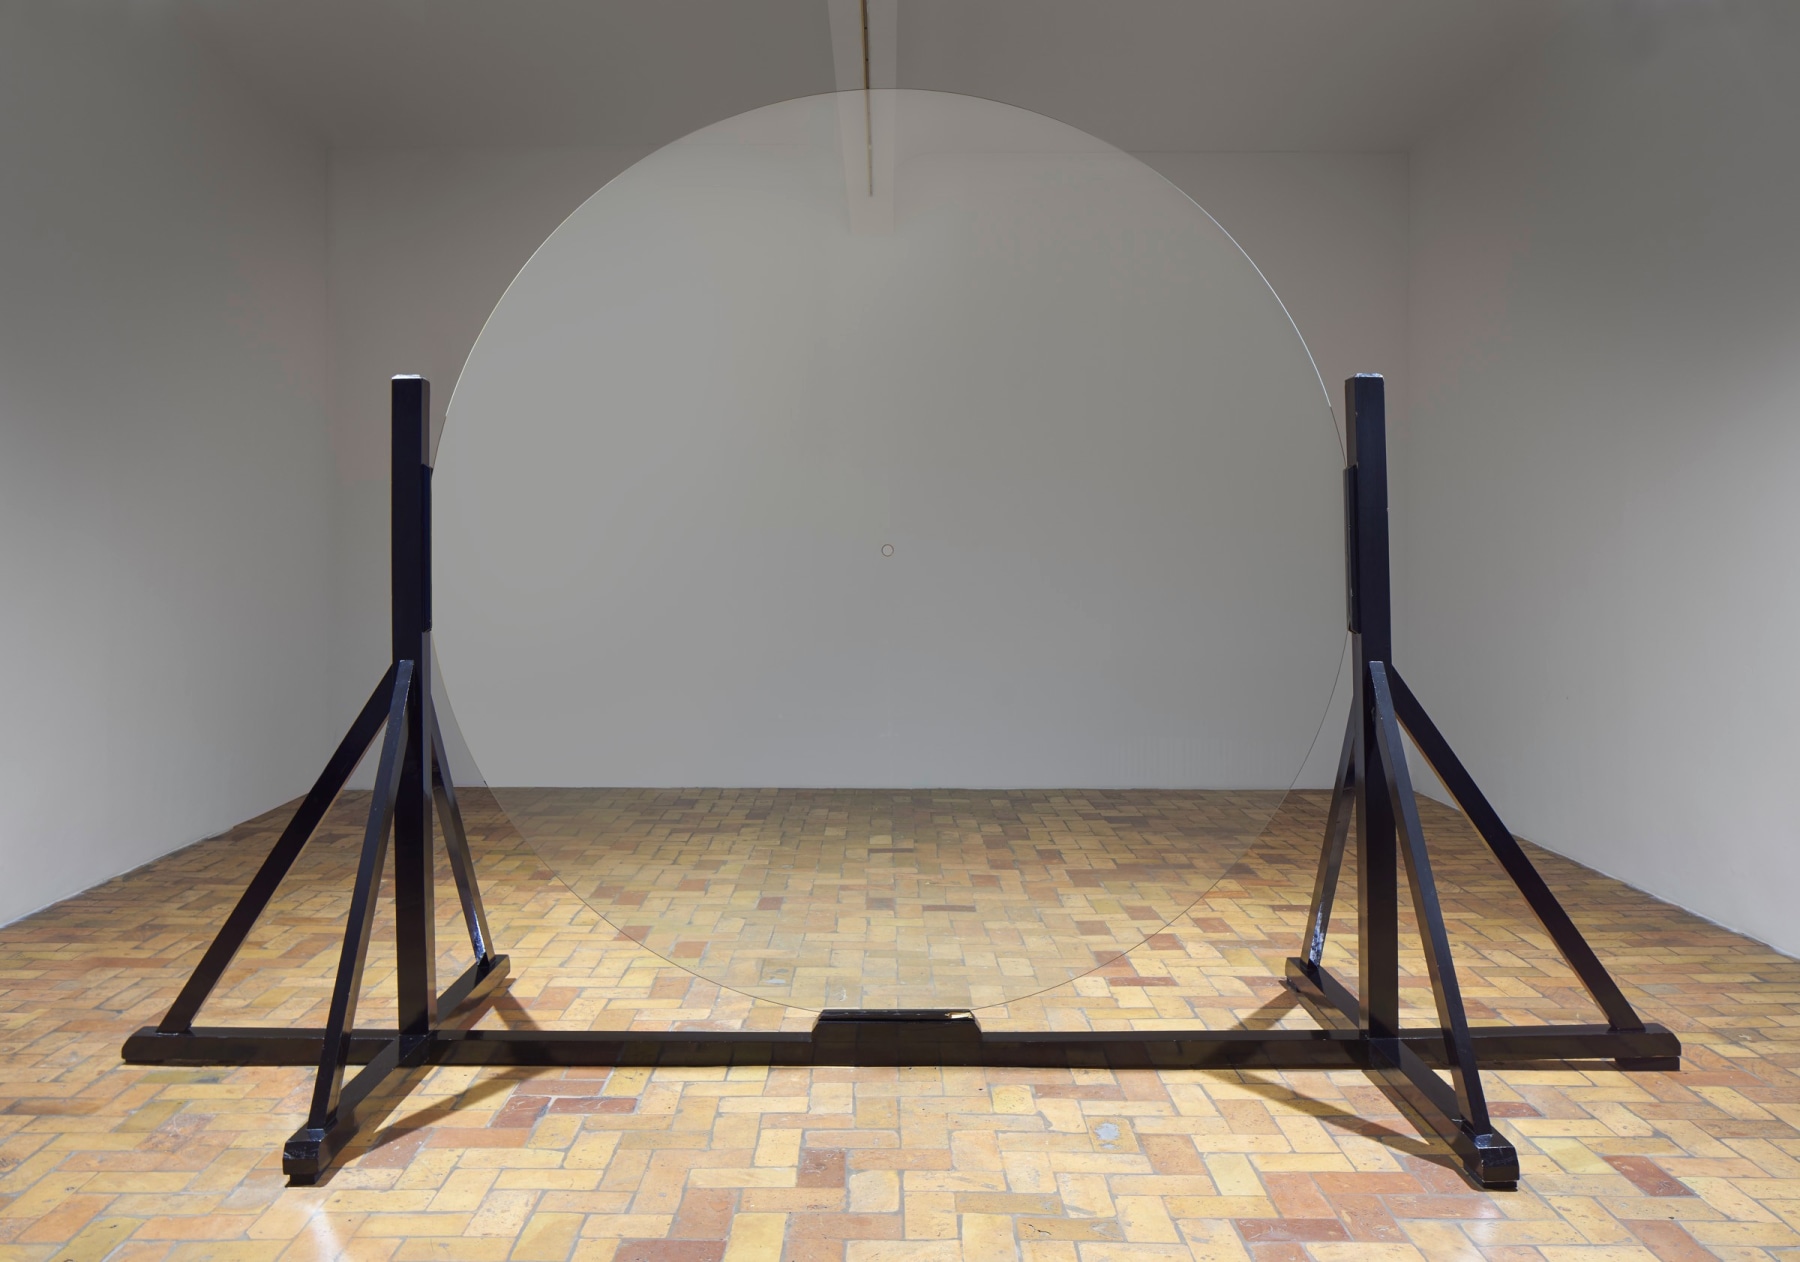 James Lee Byars

&amp;ldquo;The Hole for Speech&amp;rdquo;, 1981

Glass with gold leaf, wood

115 1/4 x 180 x 68 1/2 inches

292.5 x 457 x 174 cm

JB 36

$1,500,000